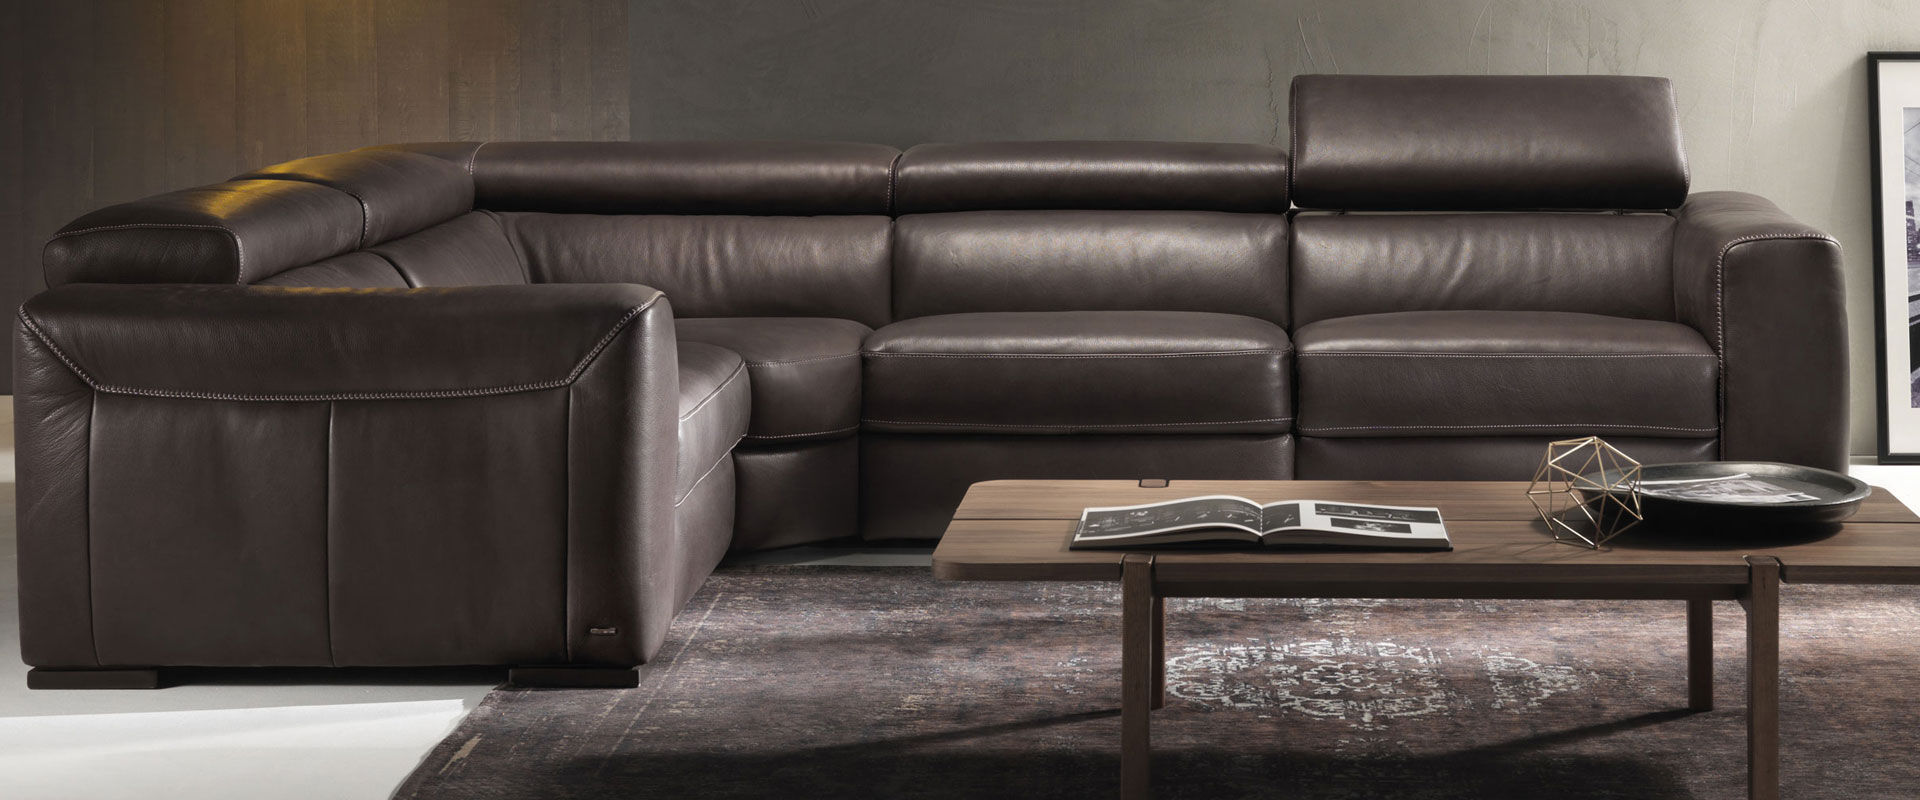 Natuzzi Editions | Sofas Sectionals